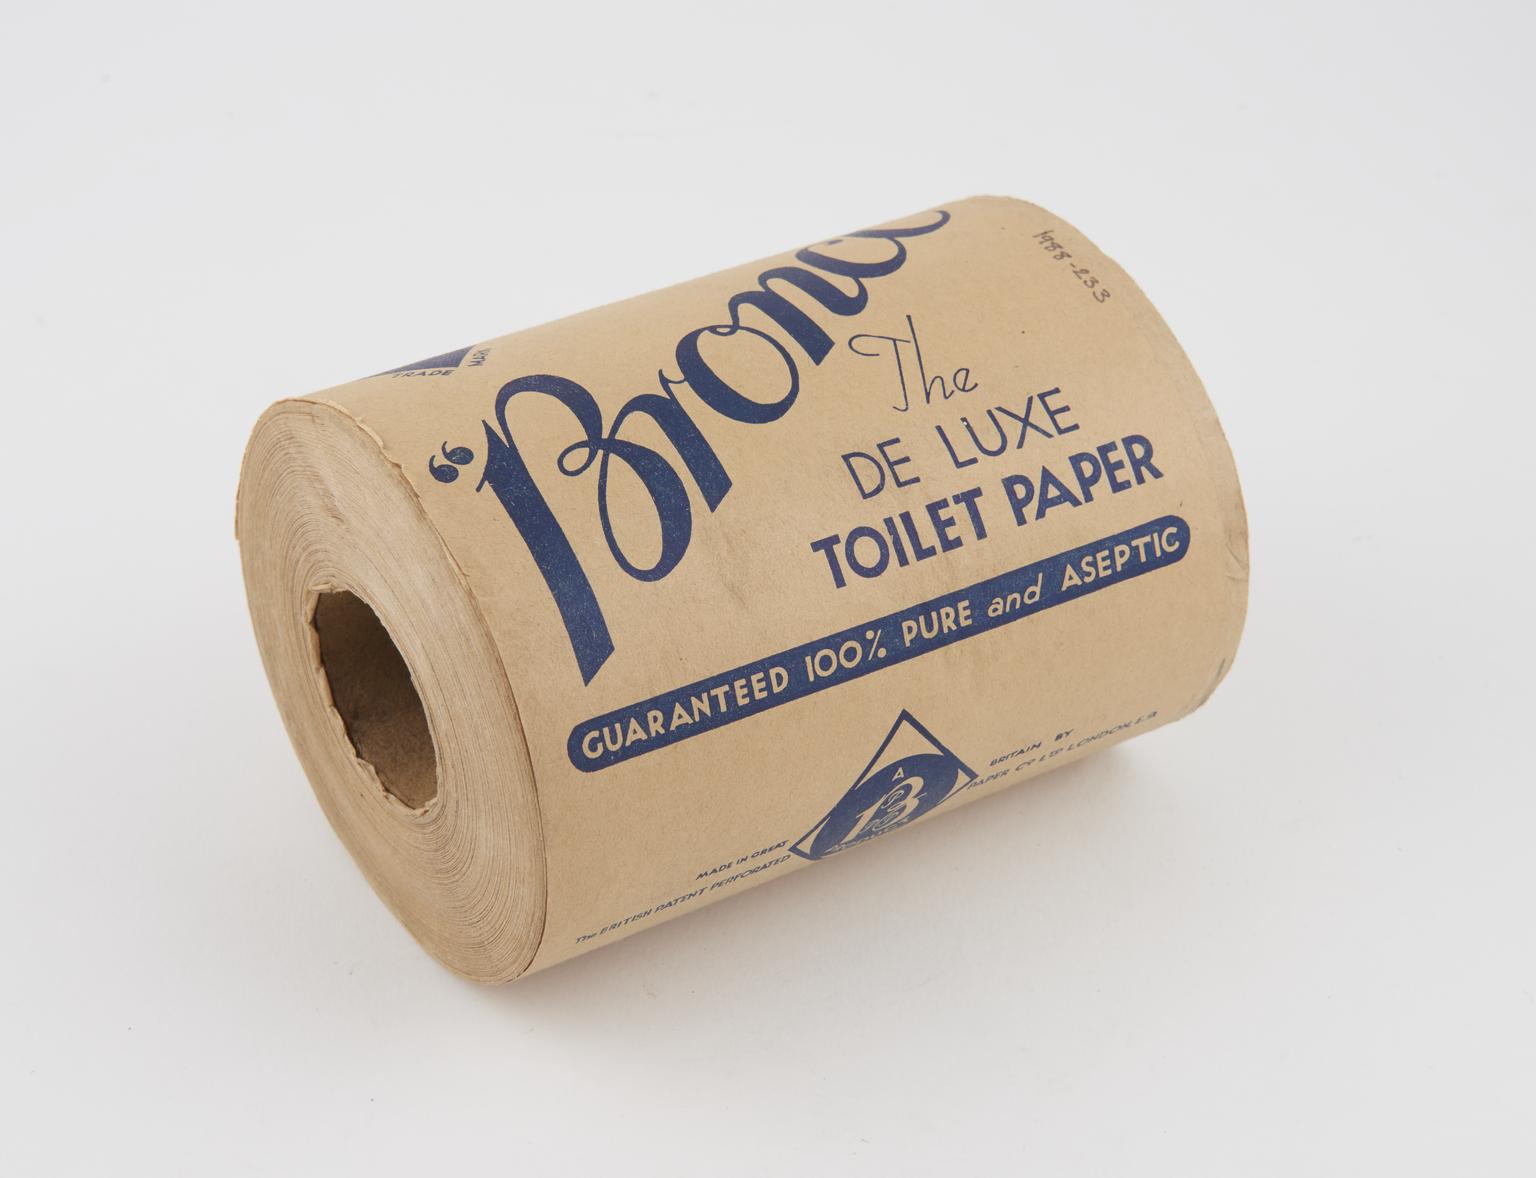 An old toilet roll